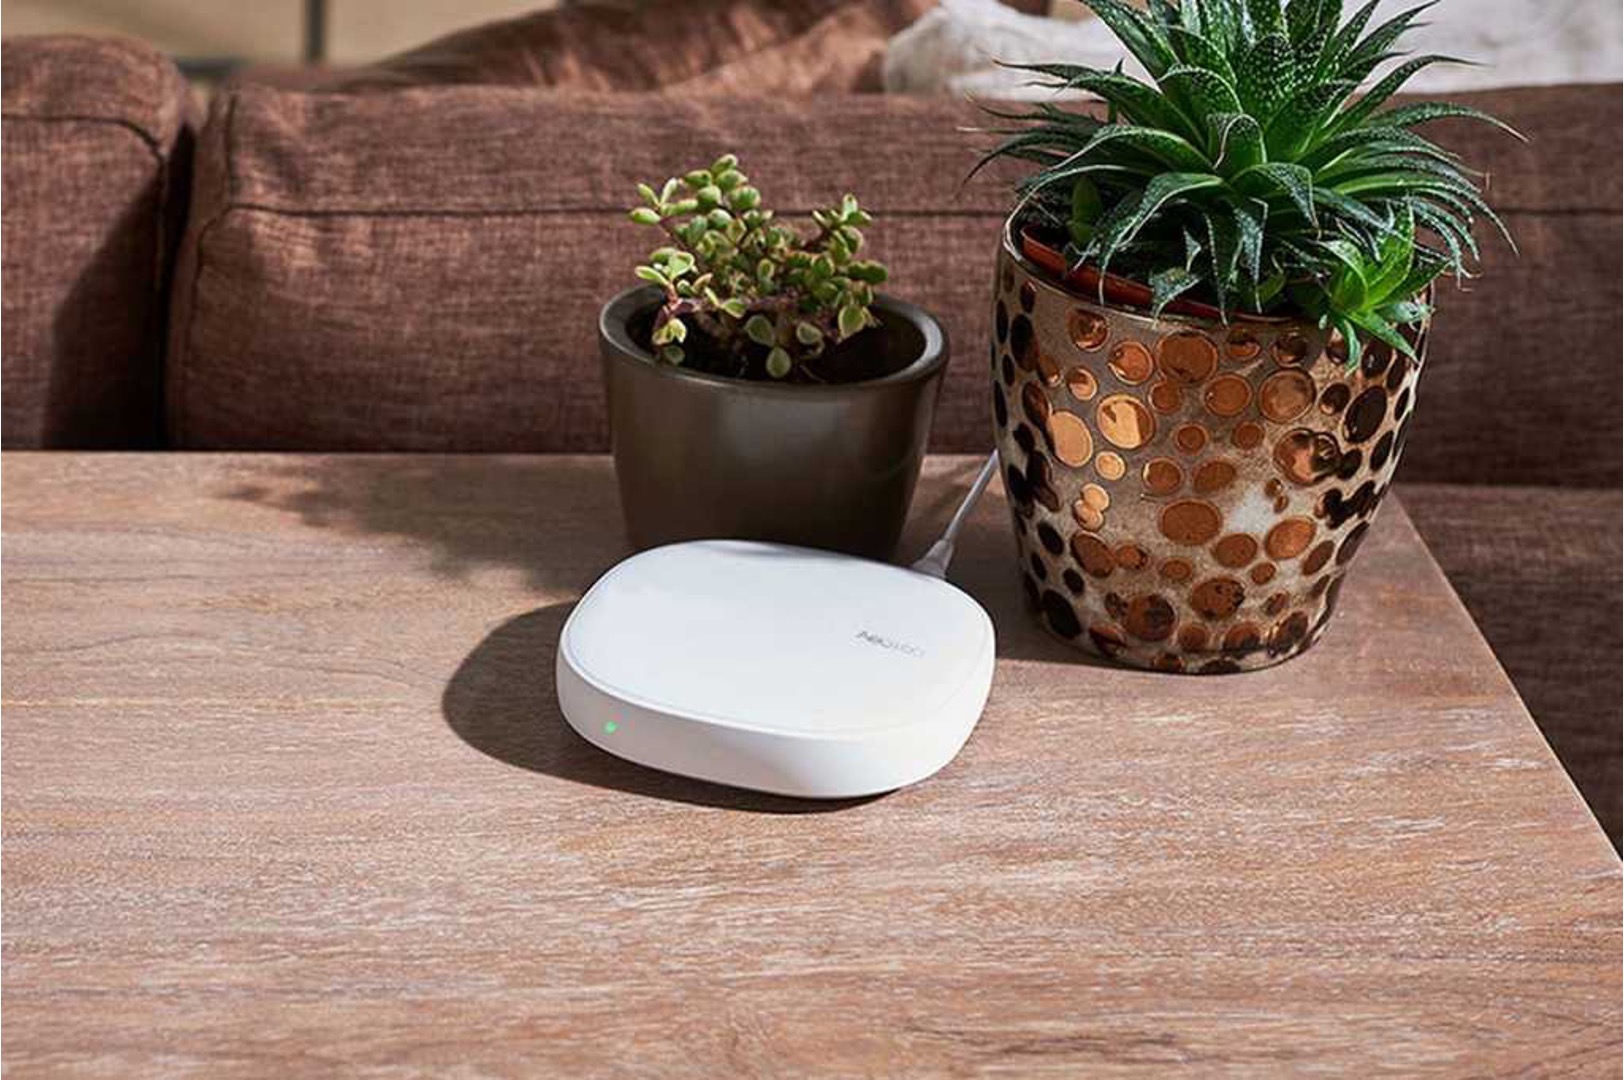 How To Connect Devices To An Aeotec Smart Home Hub